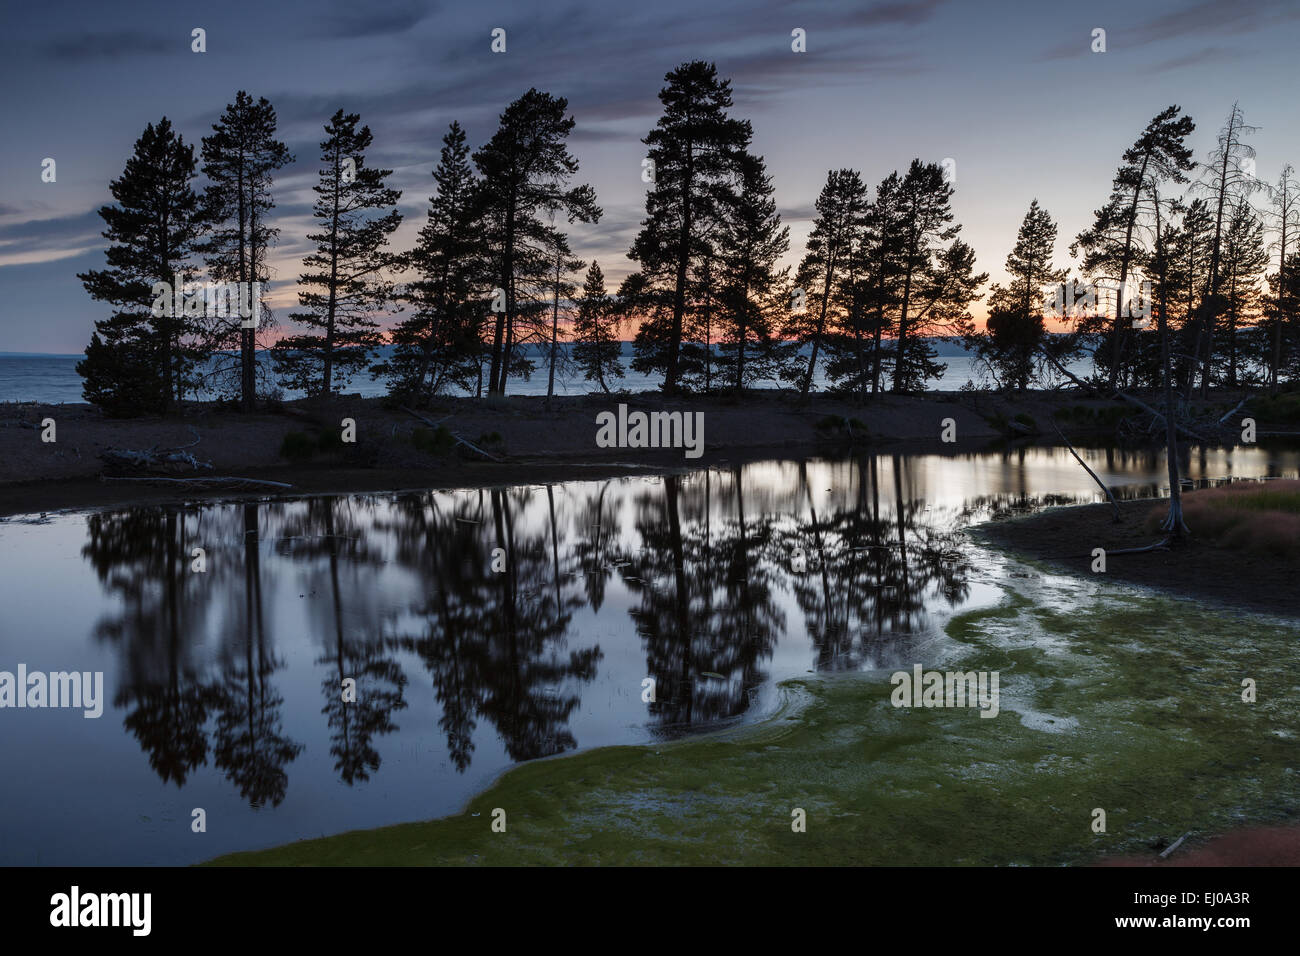 A pond by Yellowstone Lake (seen in the background) in the evening. Yellowstone National Park, Wyoming, United States of America Stock Photo